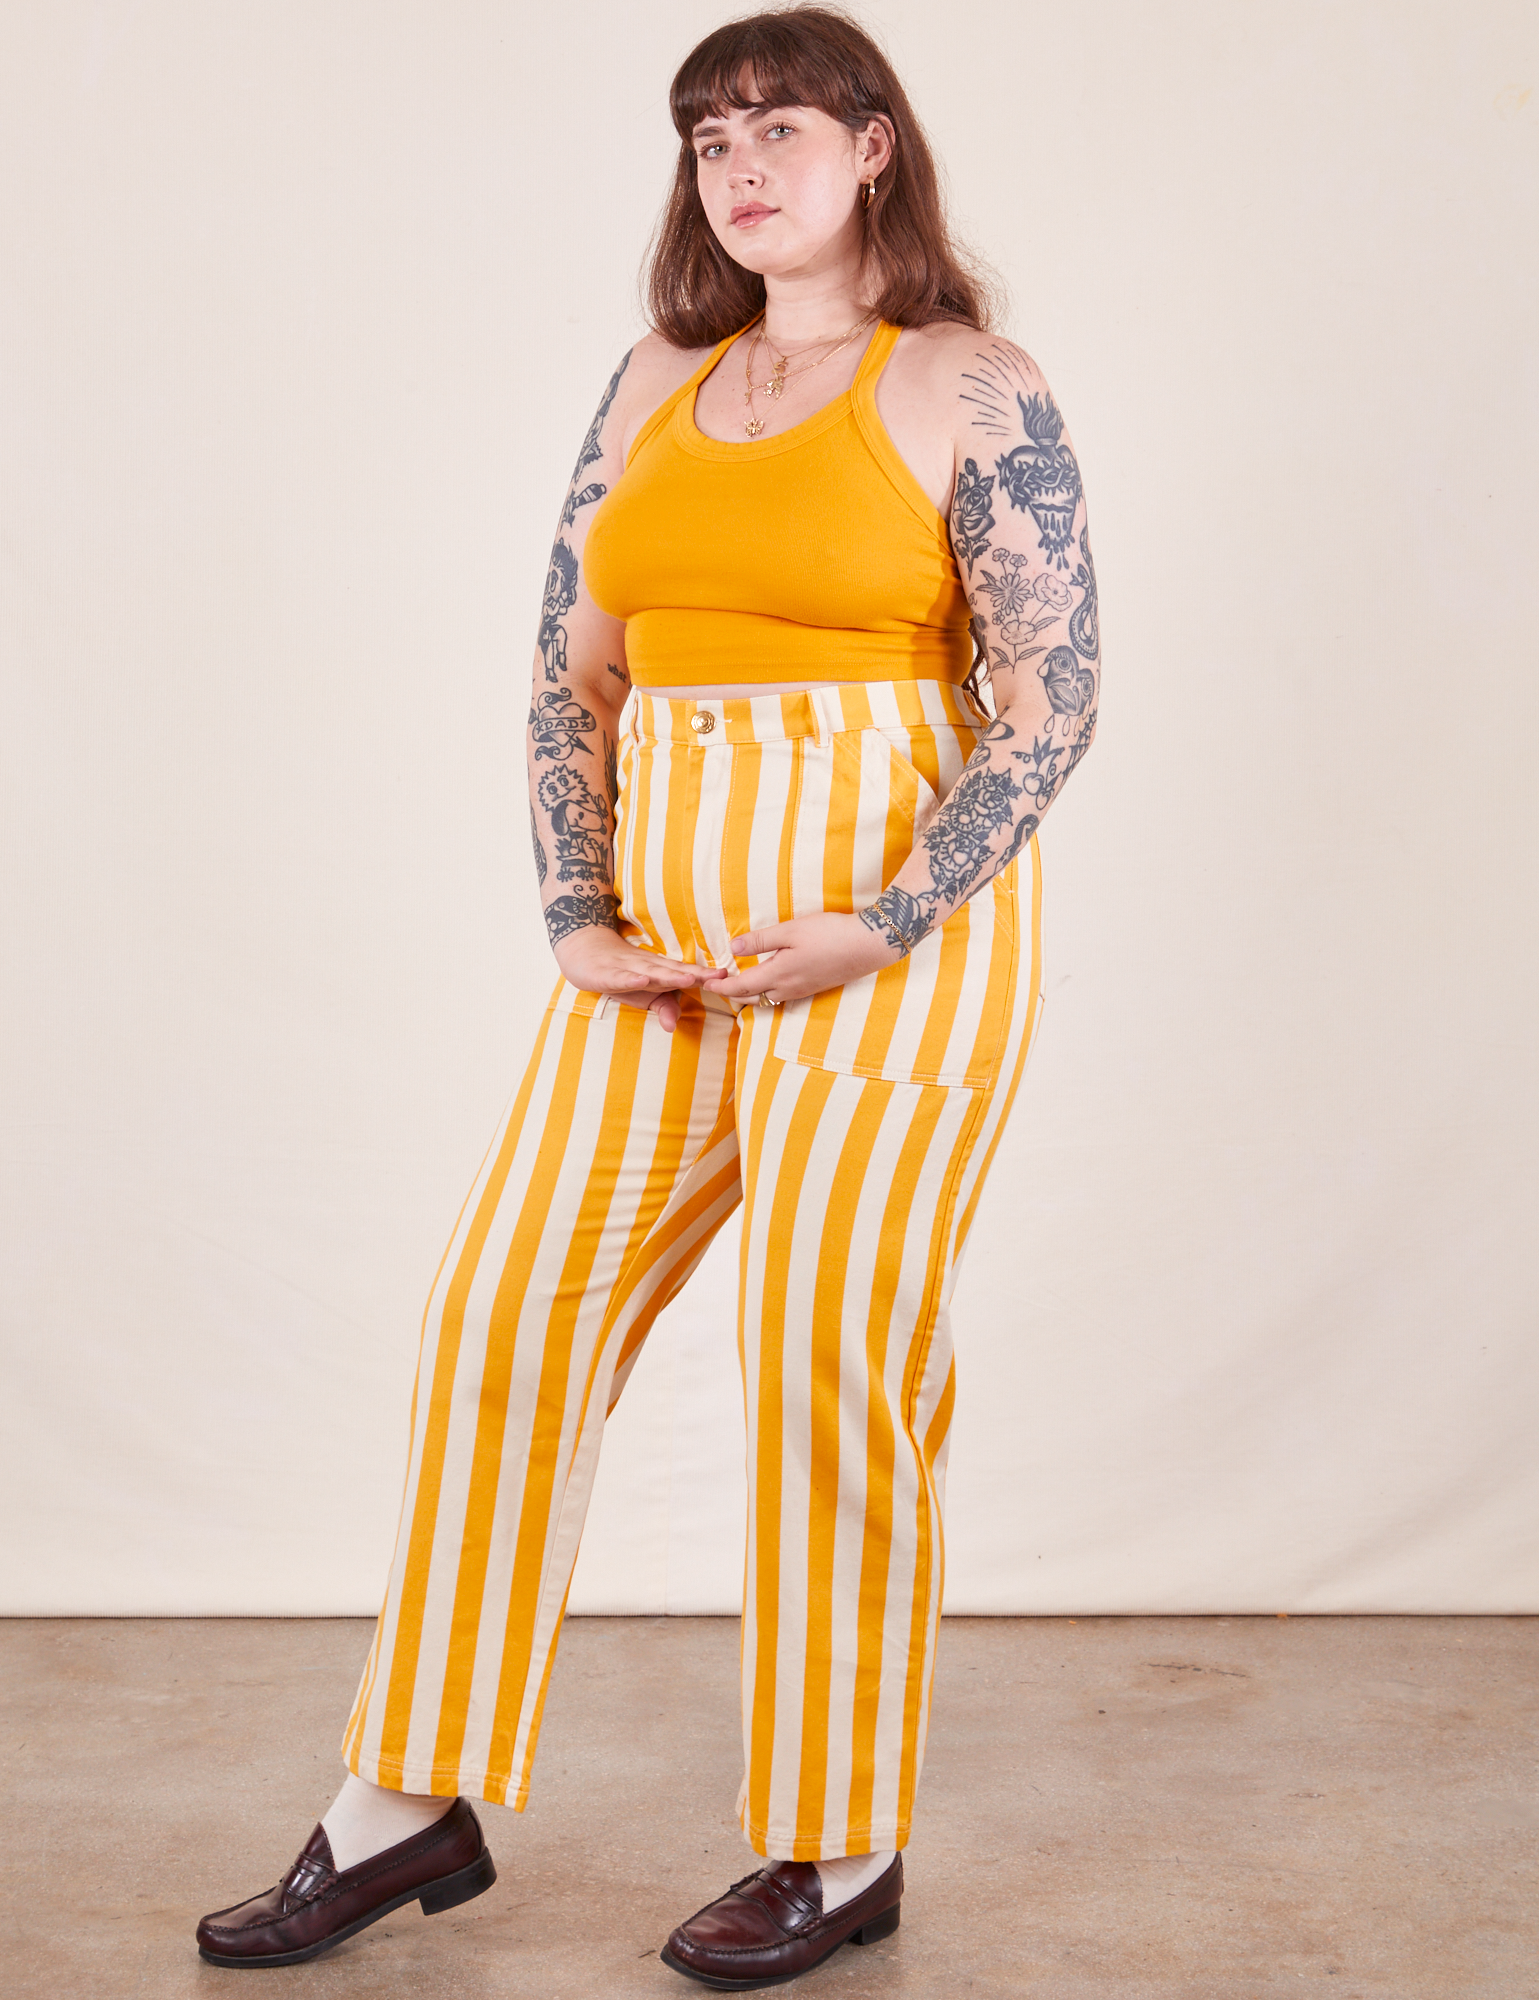 Angled view of Work Pants in Lemon Stripe and mustard yellow Halter Top on Sydney